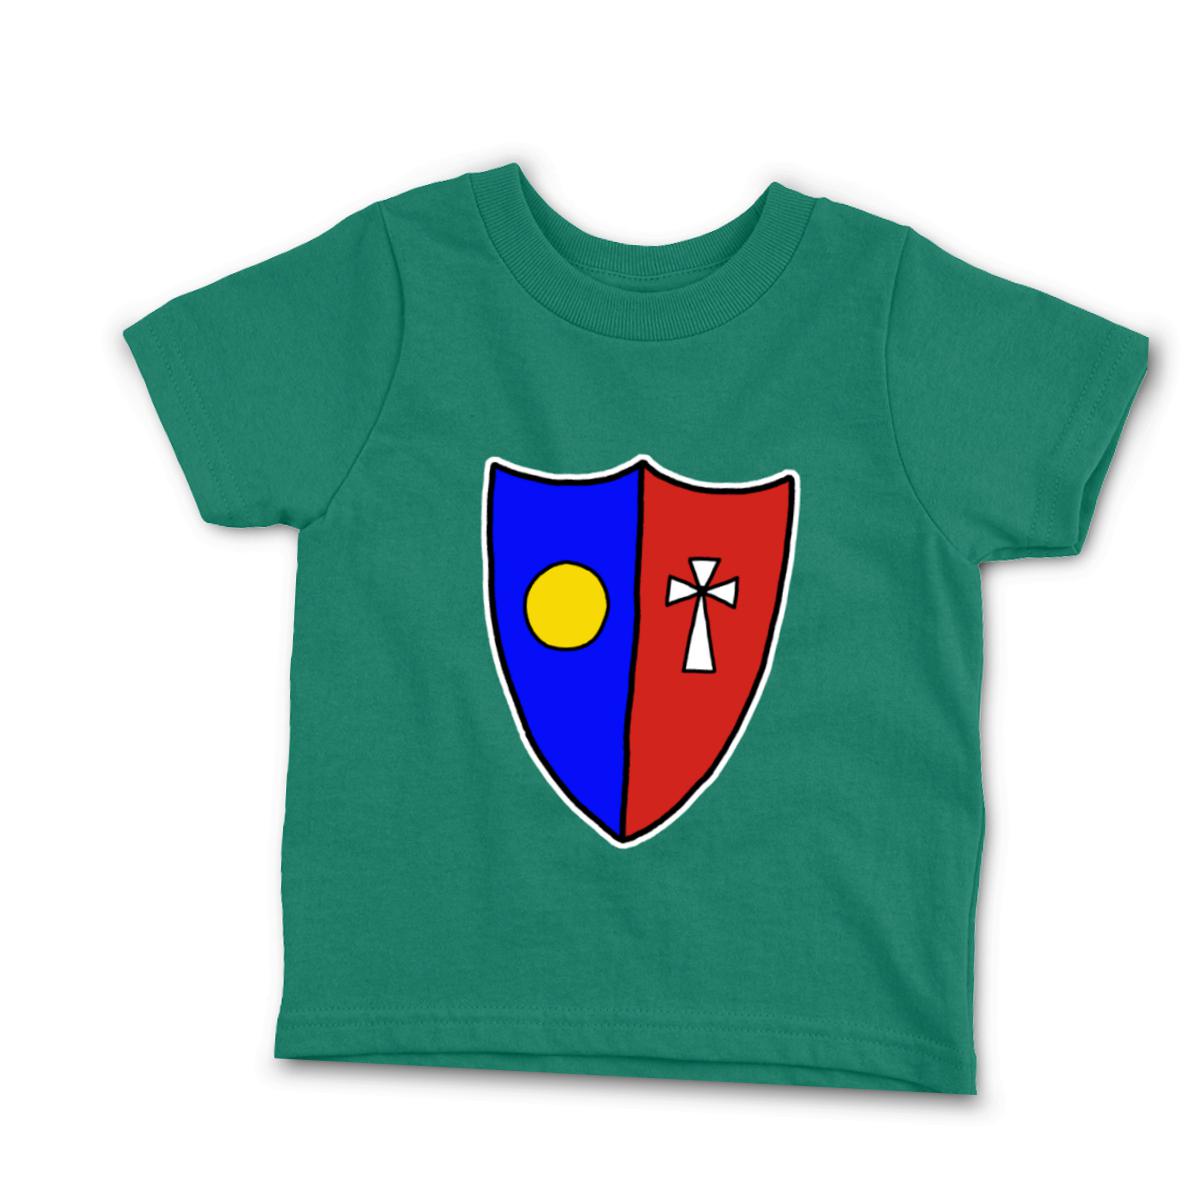 Shield Toddler Tee 56T kelly